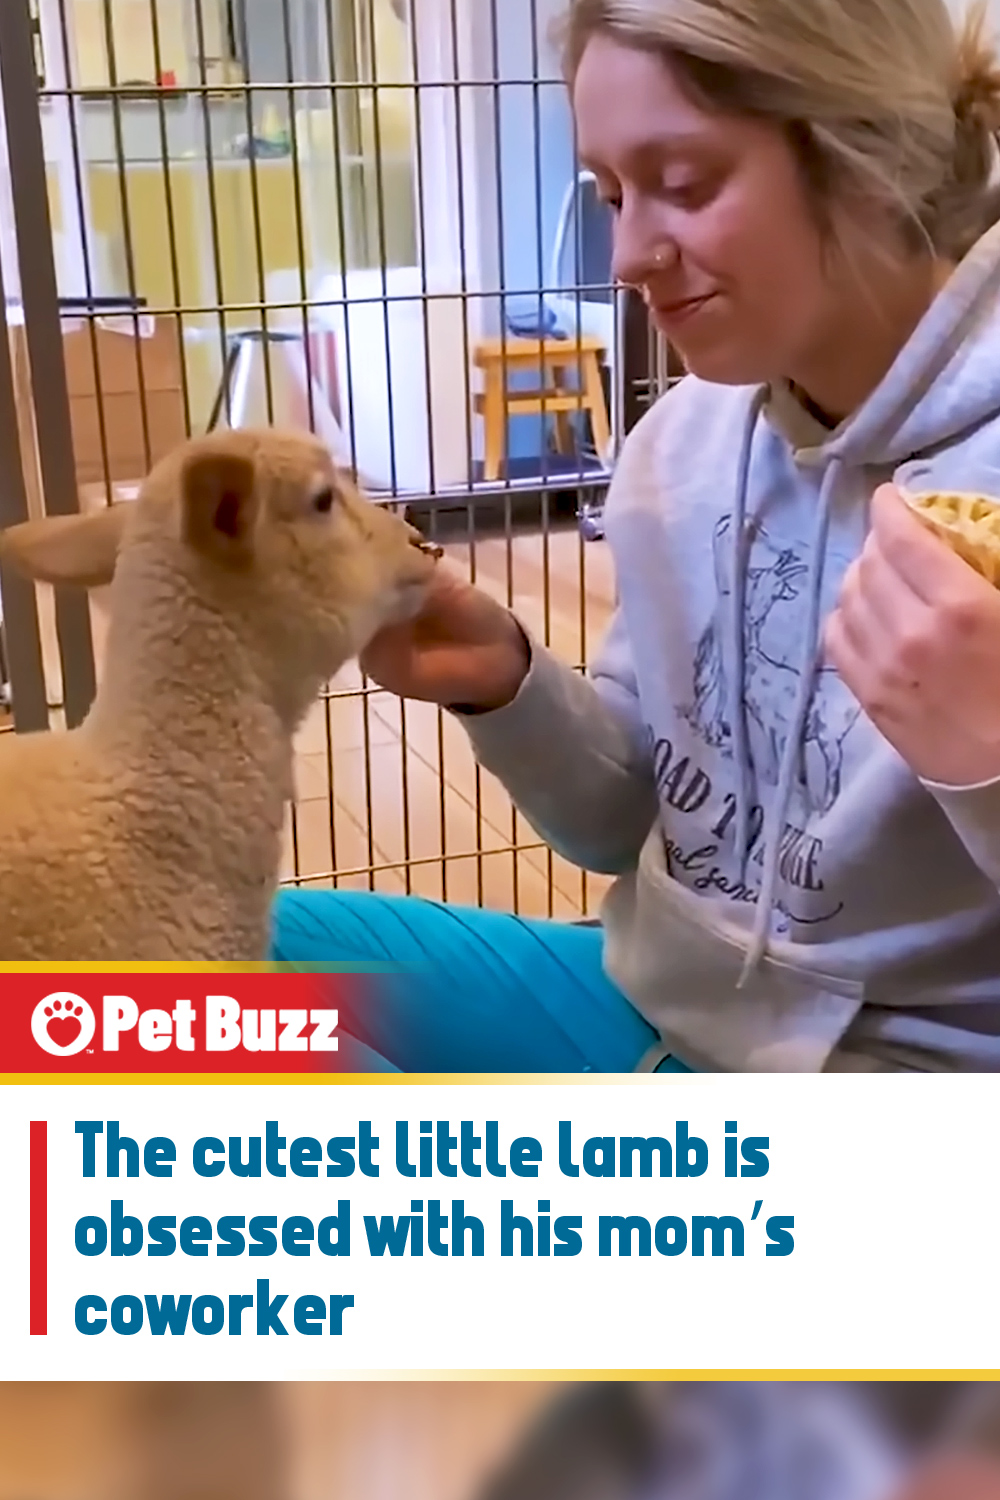 The cutest little lamb is obsessed with his mom’s coworker